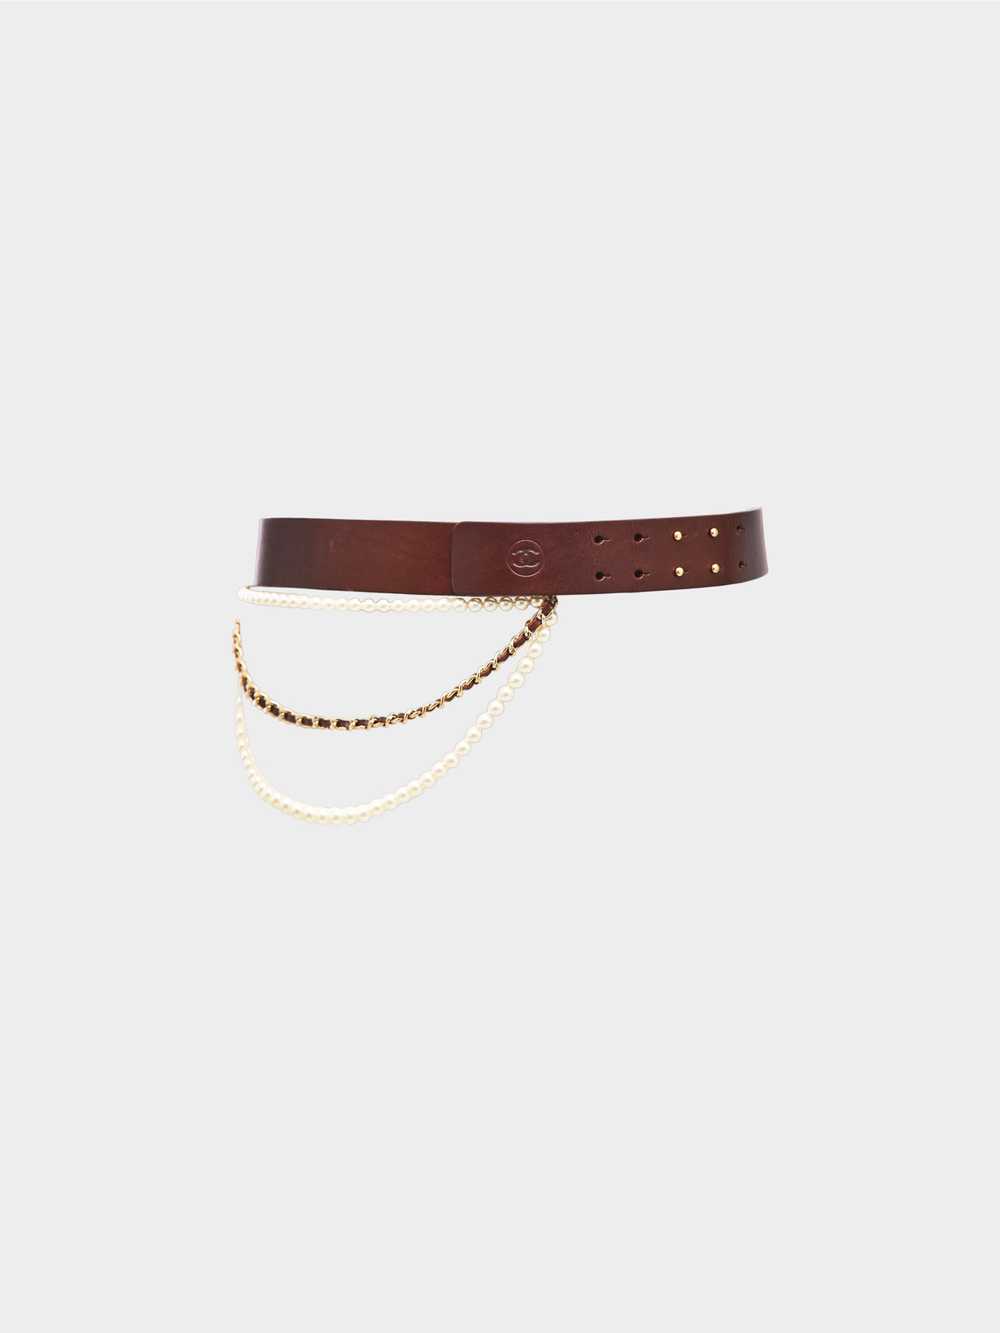 Chanel SS 2002 Brown Leather and Faux Pearl Belt - image 1